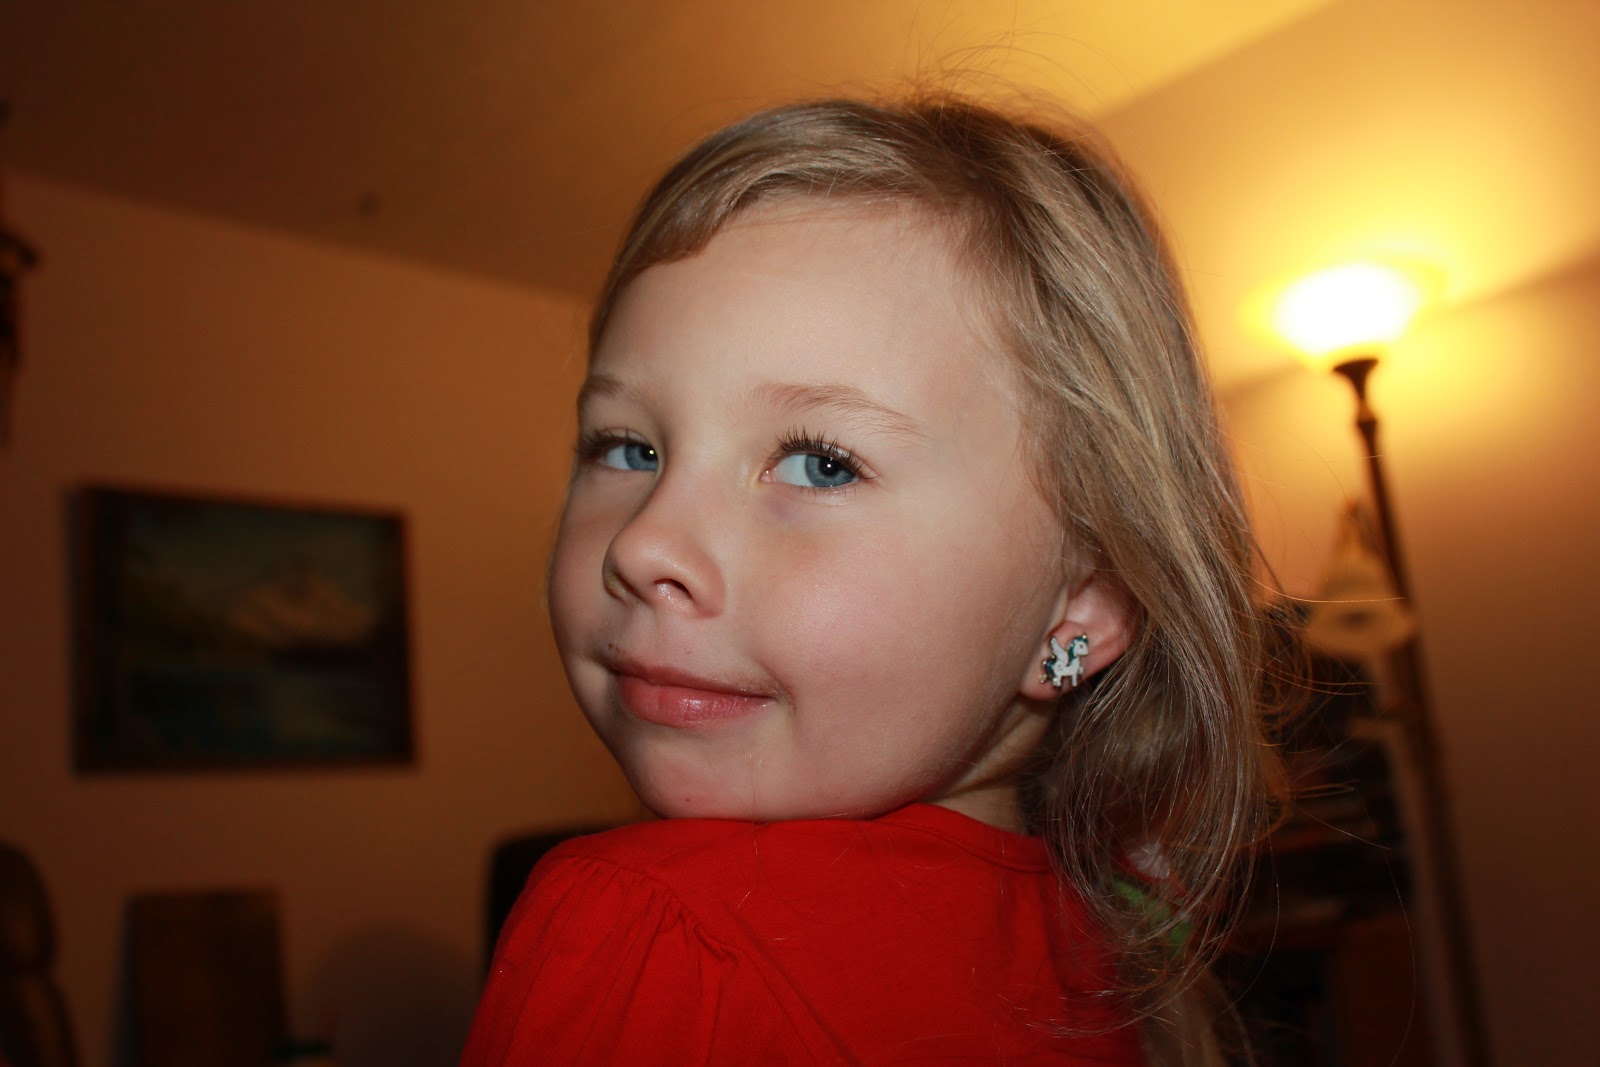 Gracie showing off her unicorn earrings - this is such a model pose - ha! 